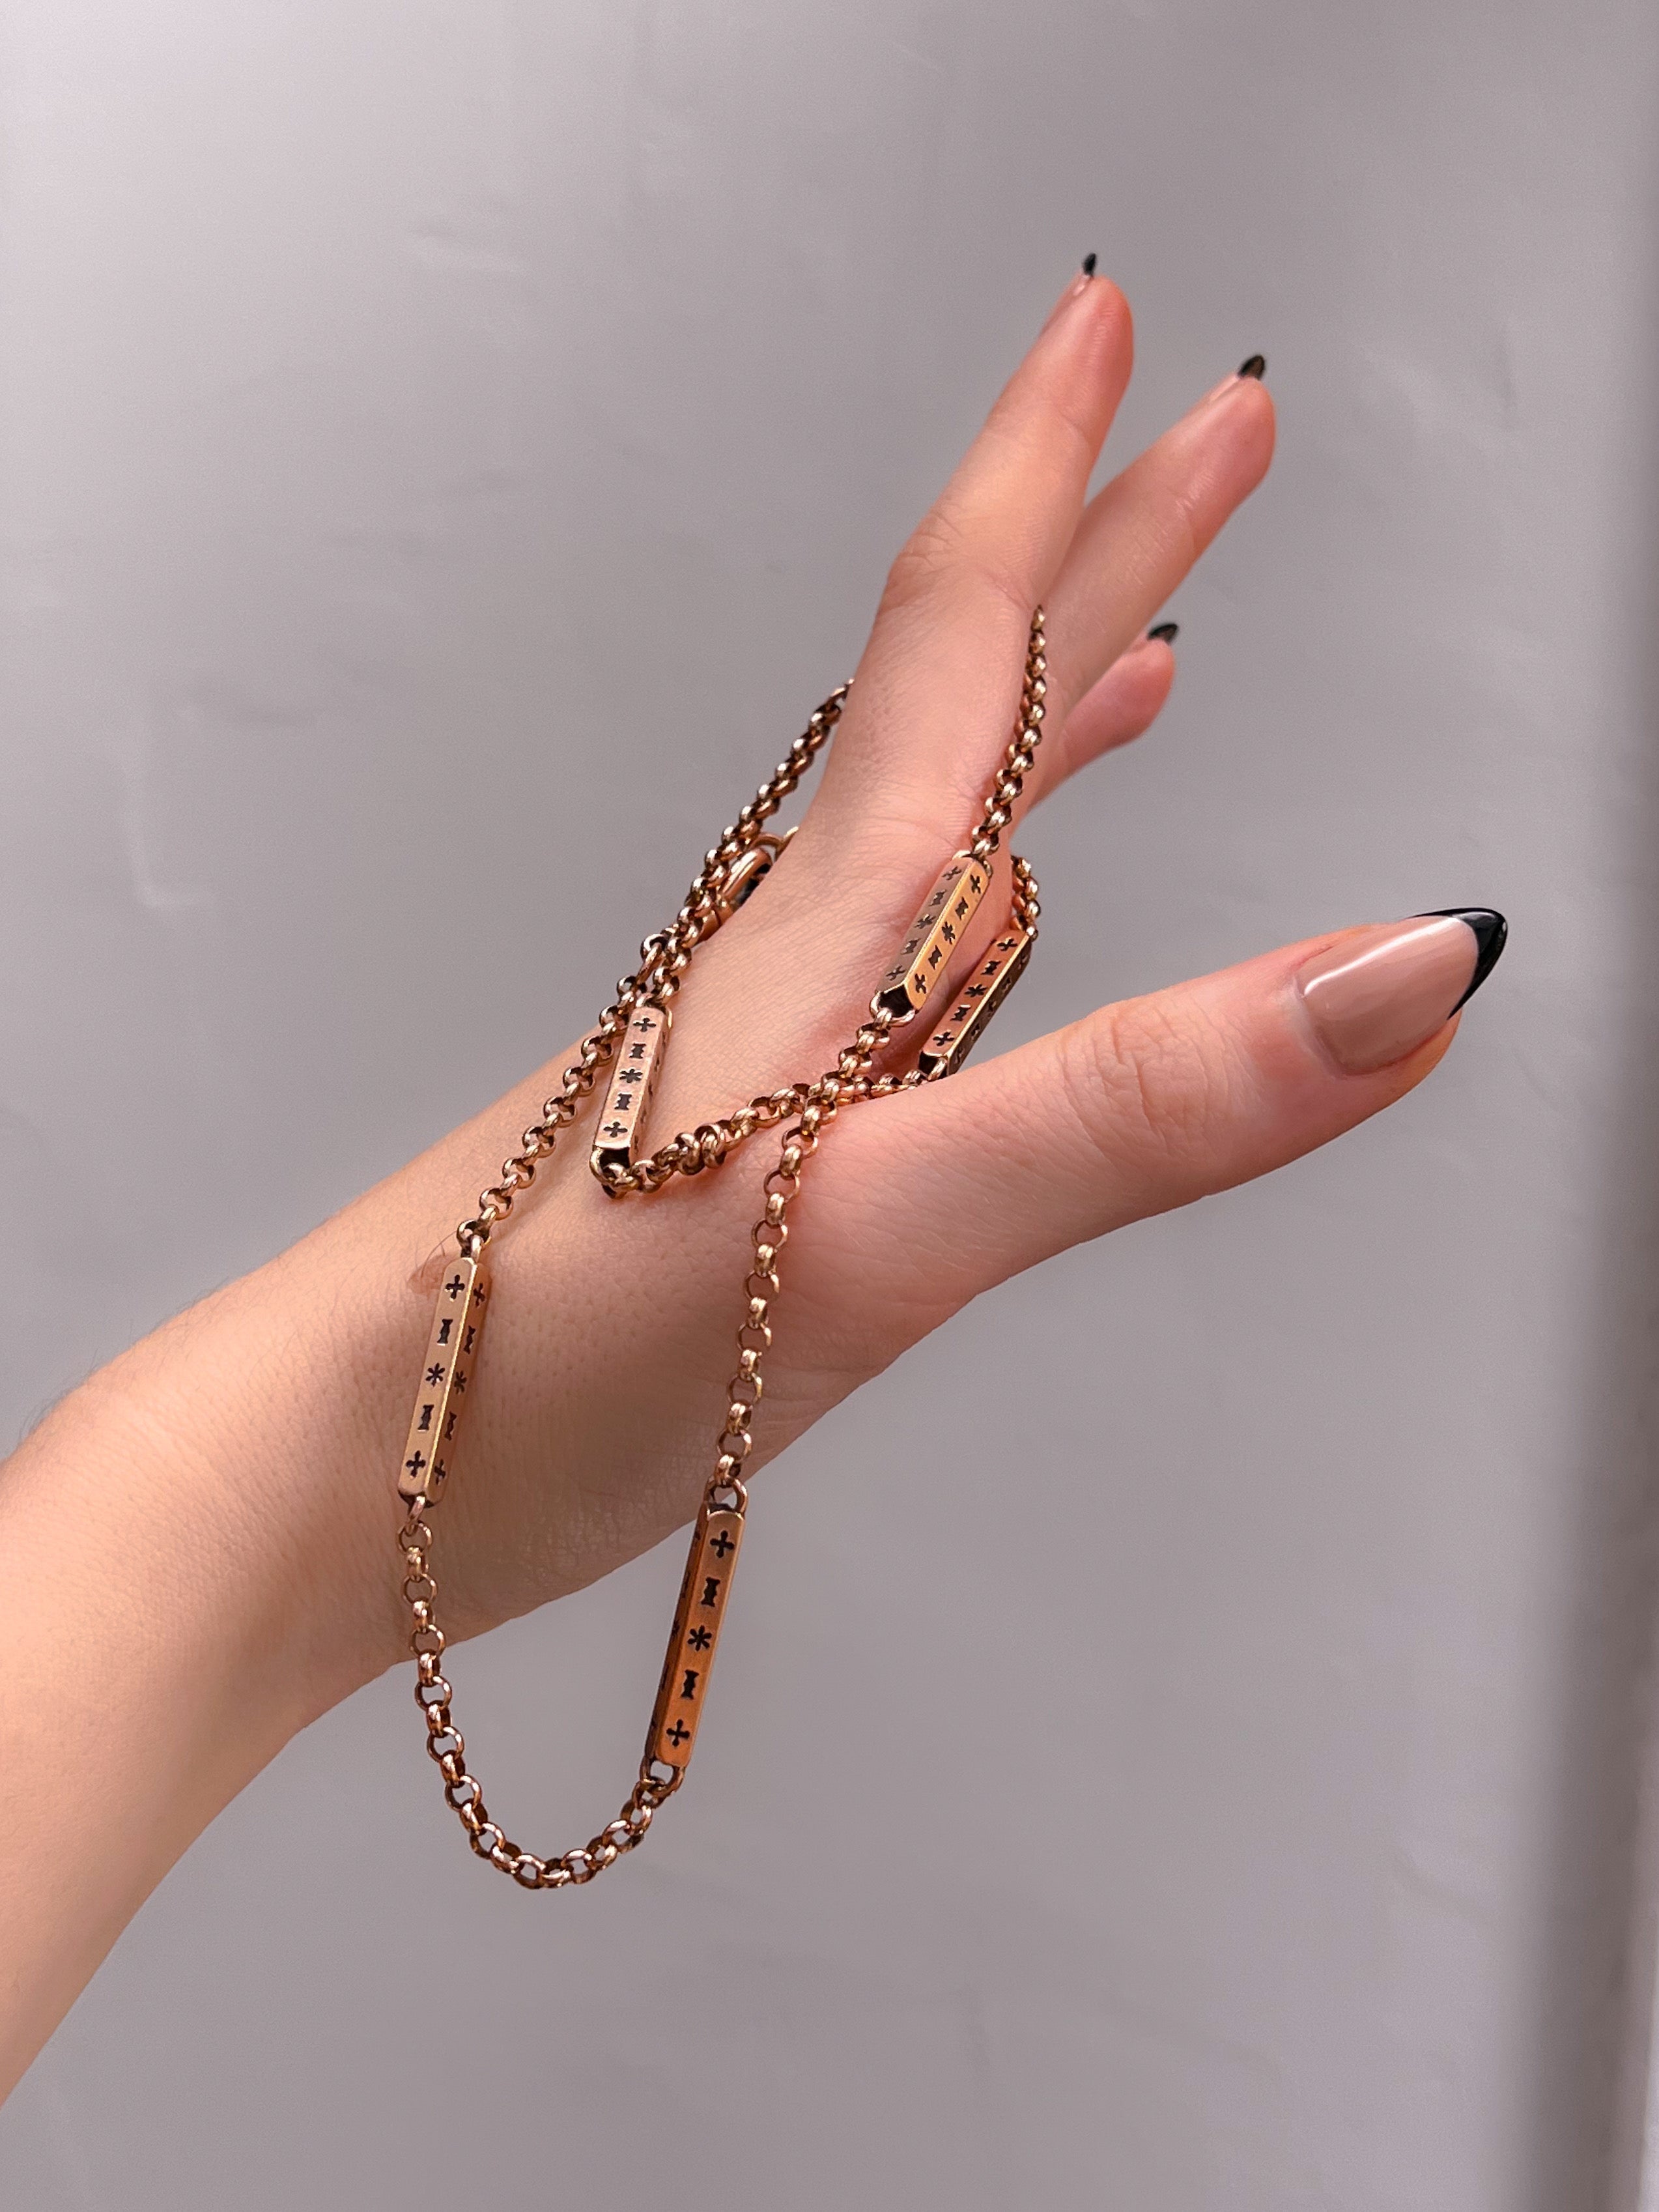 Sumptuous 9ct Pink Gold English Station Chain